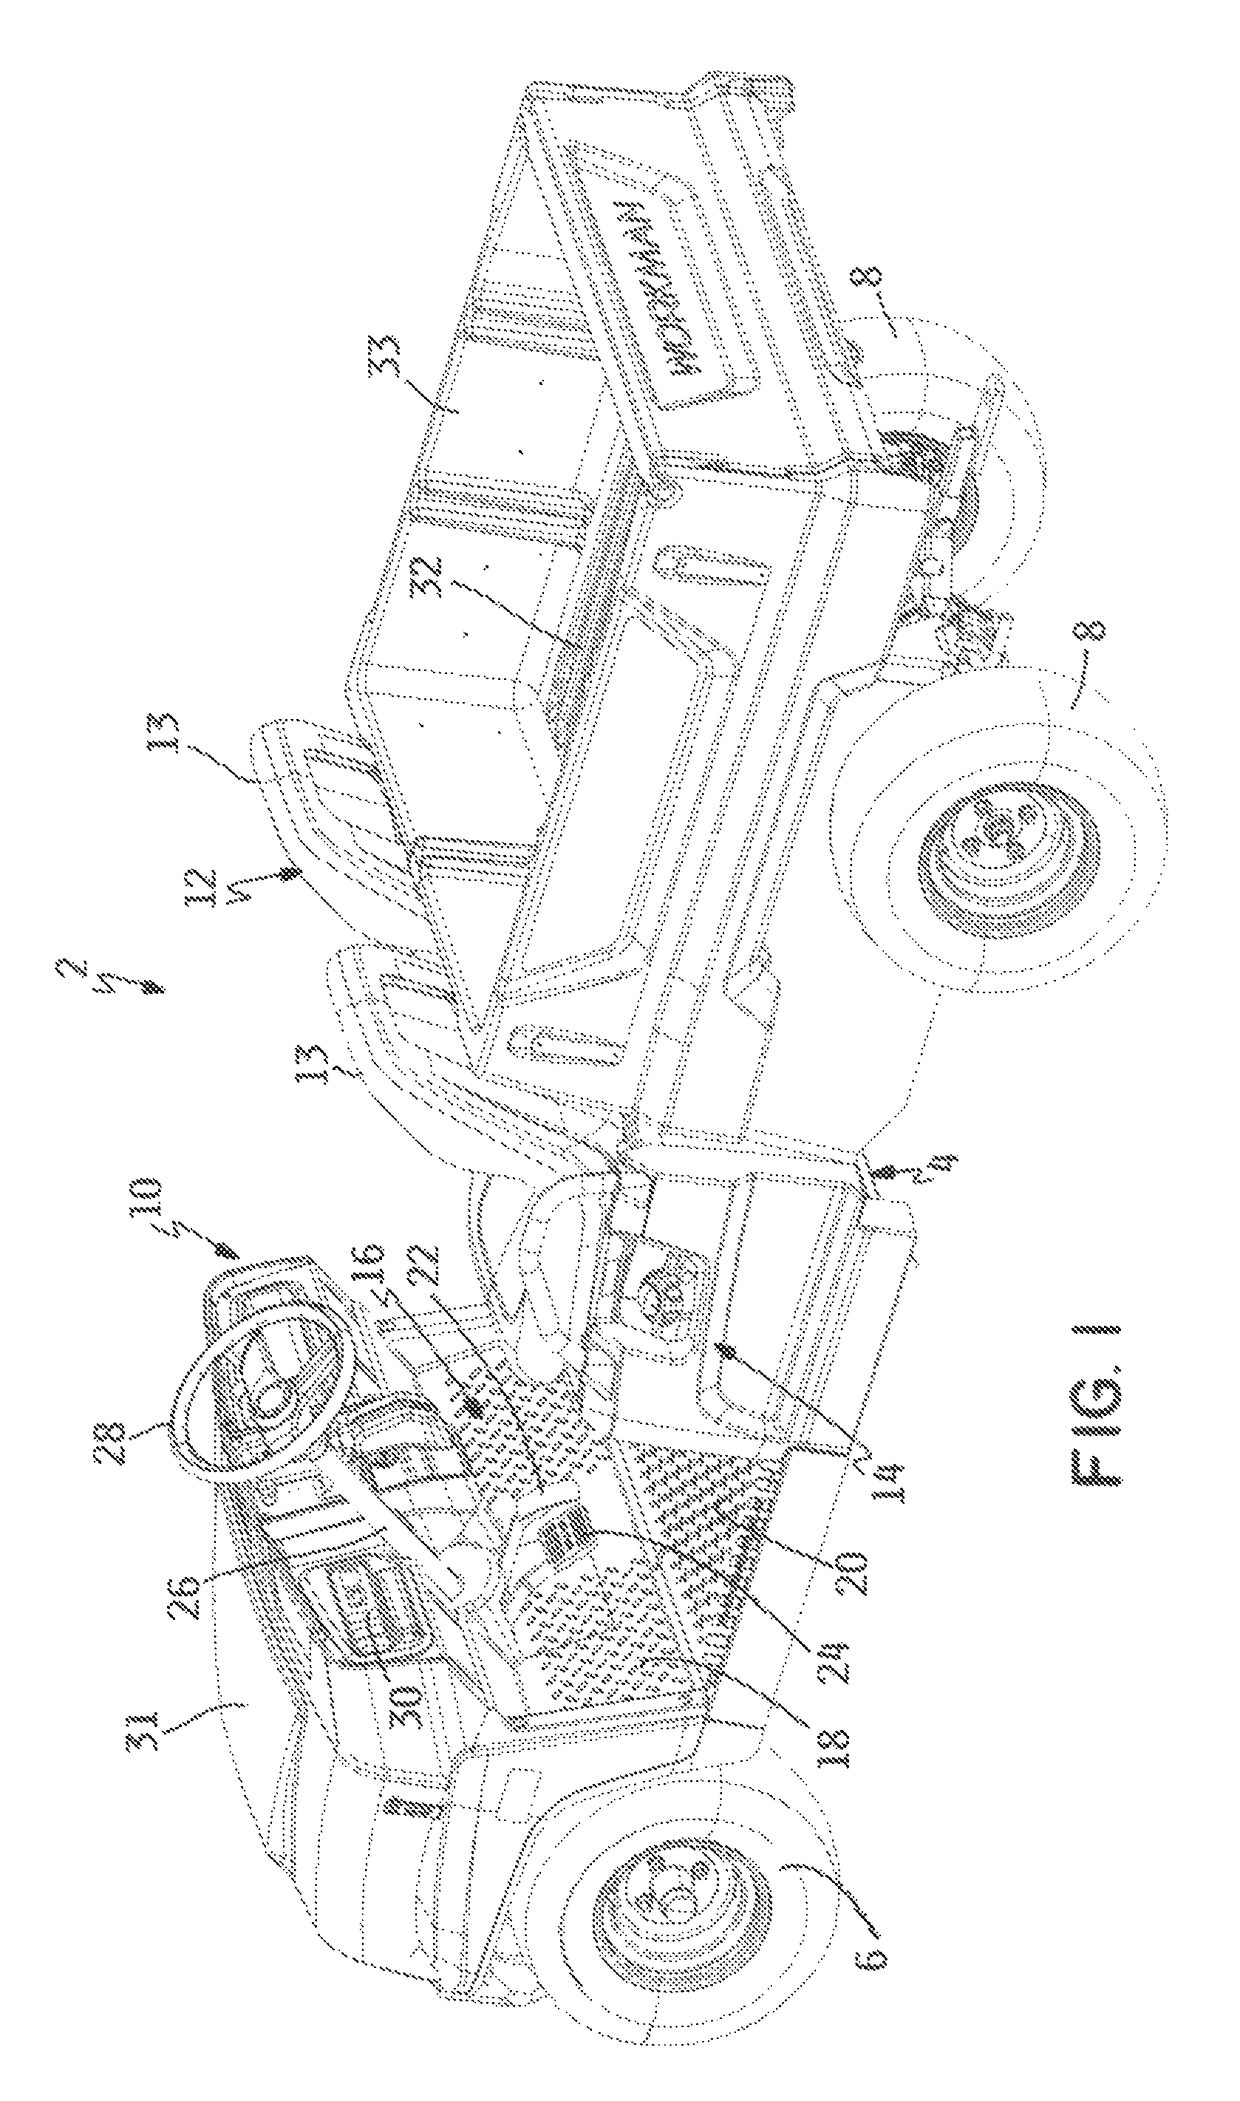 Method and kits for converting a two seat utility vehicle to a four seat configuration and for providing an extended bed thereon